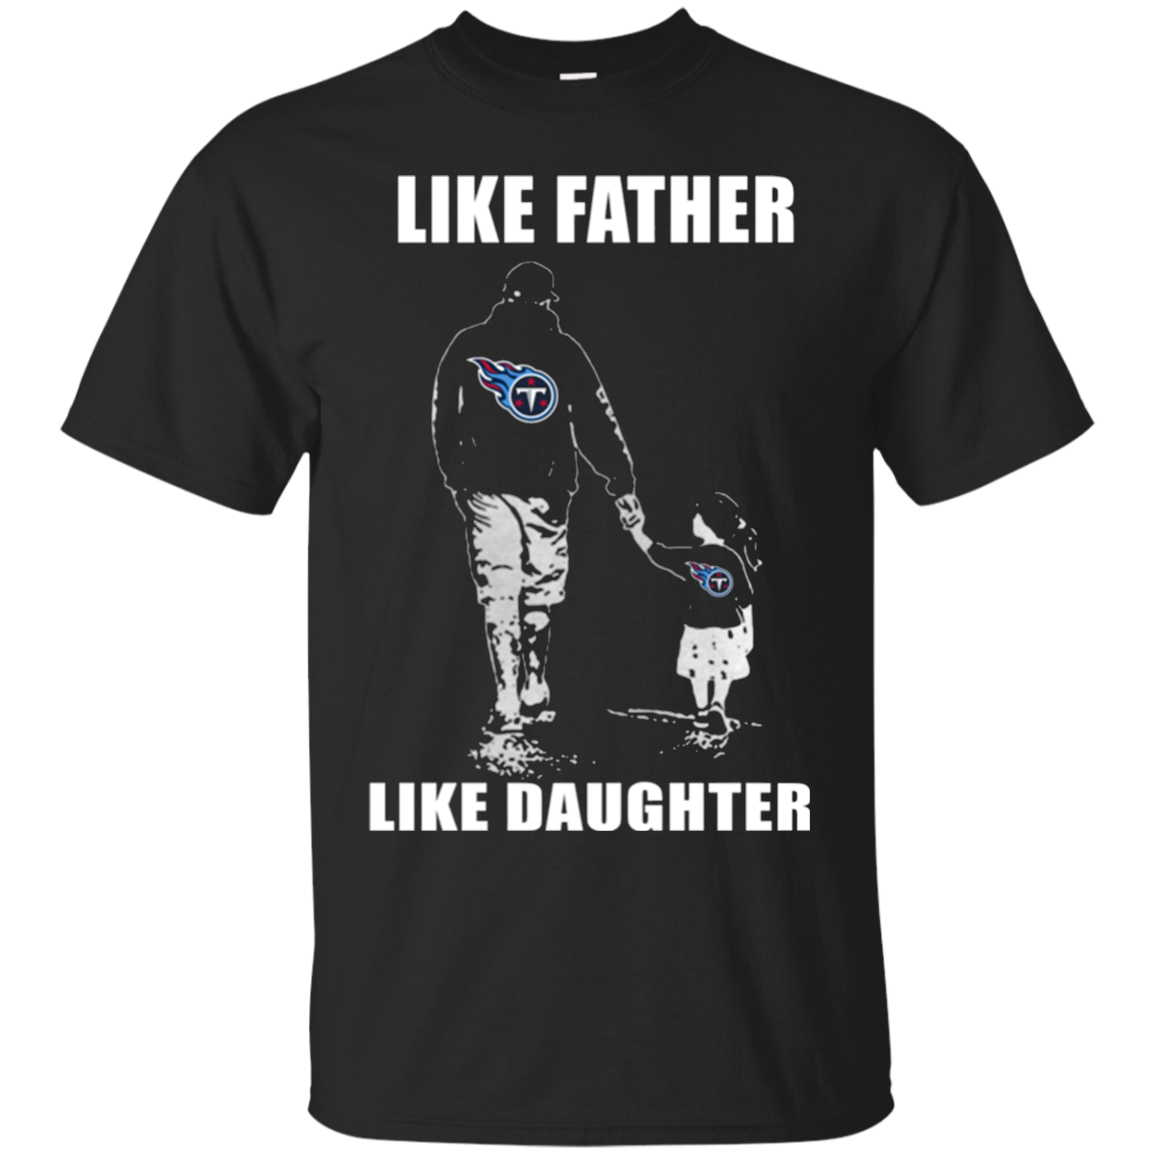 Like Father Like Daughter - Tennessee Titans Shirt